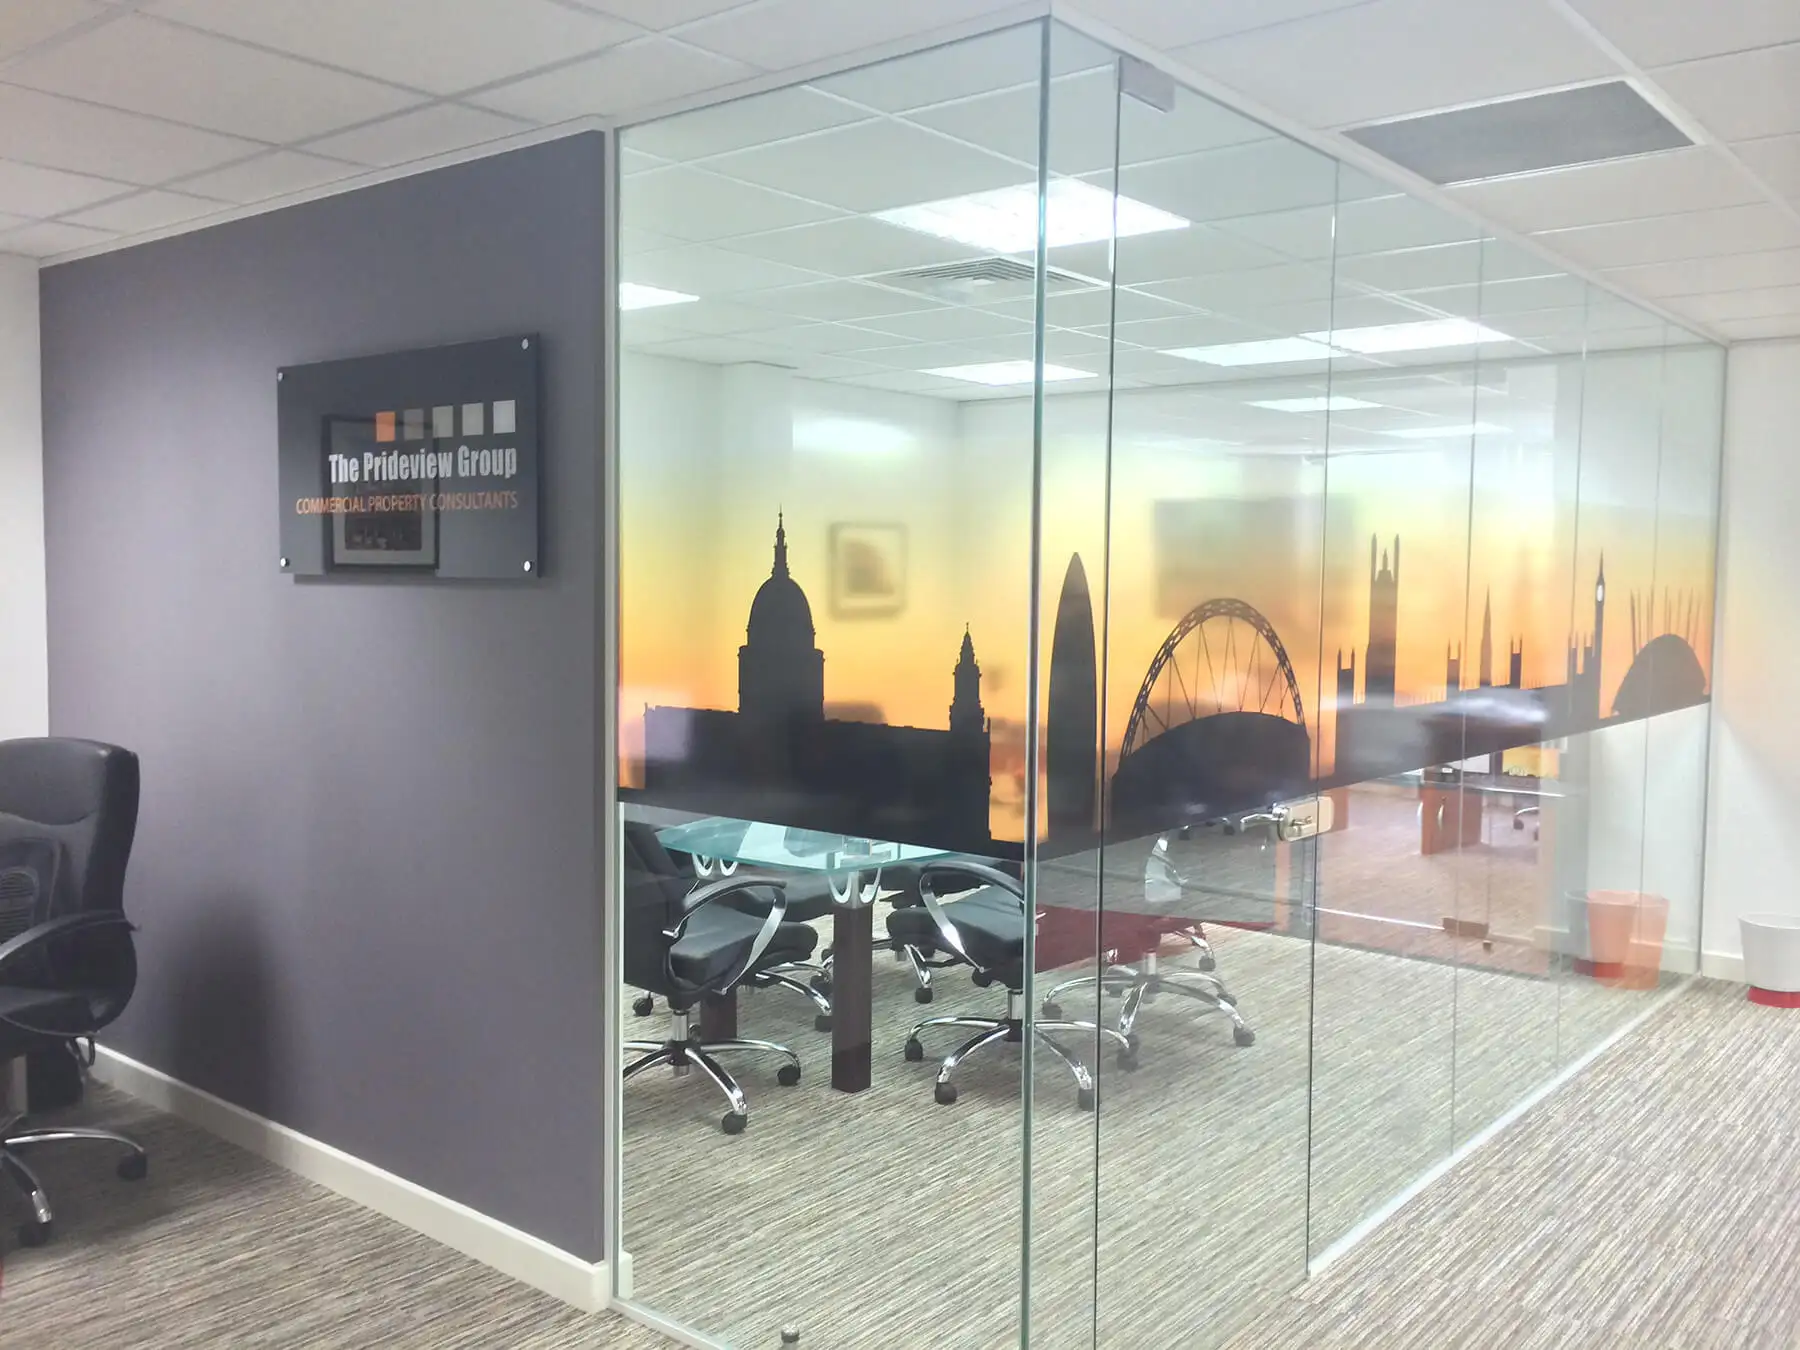 Meeting room with glass partitions and solid wall with logo